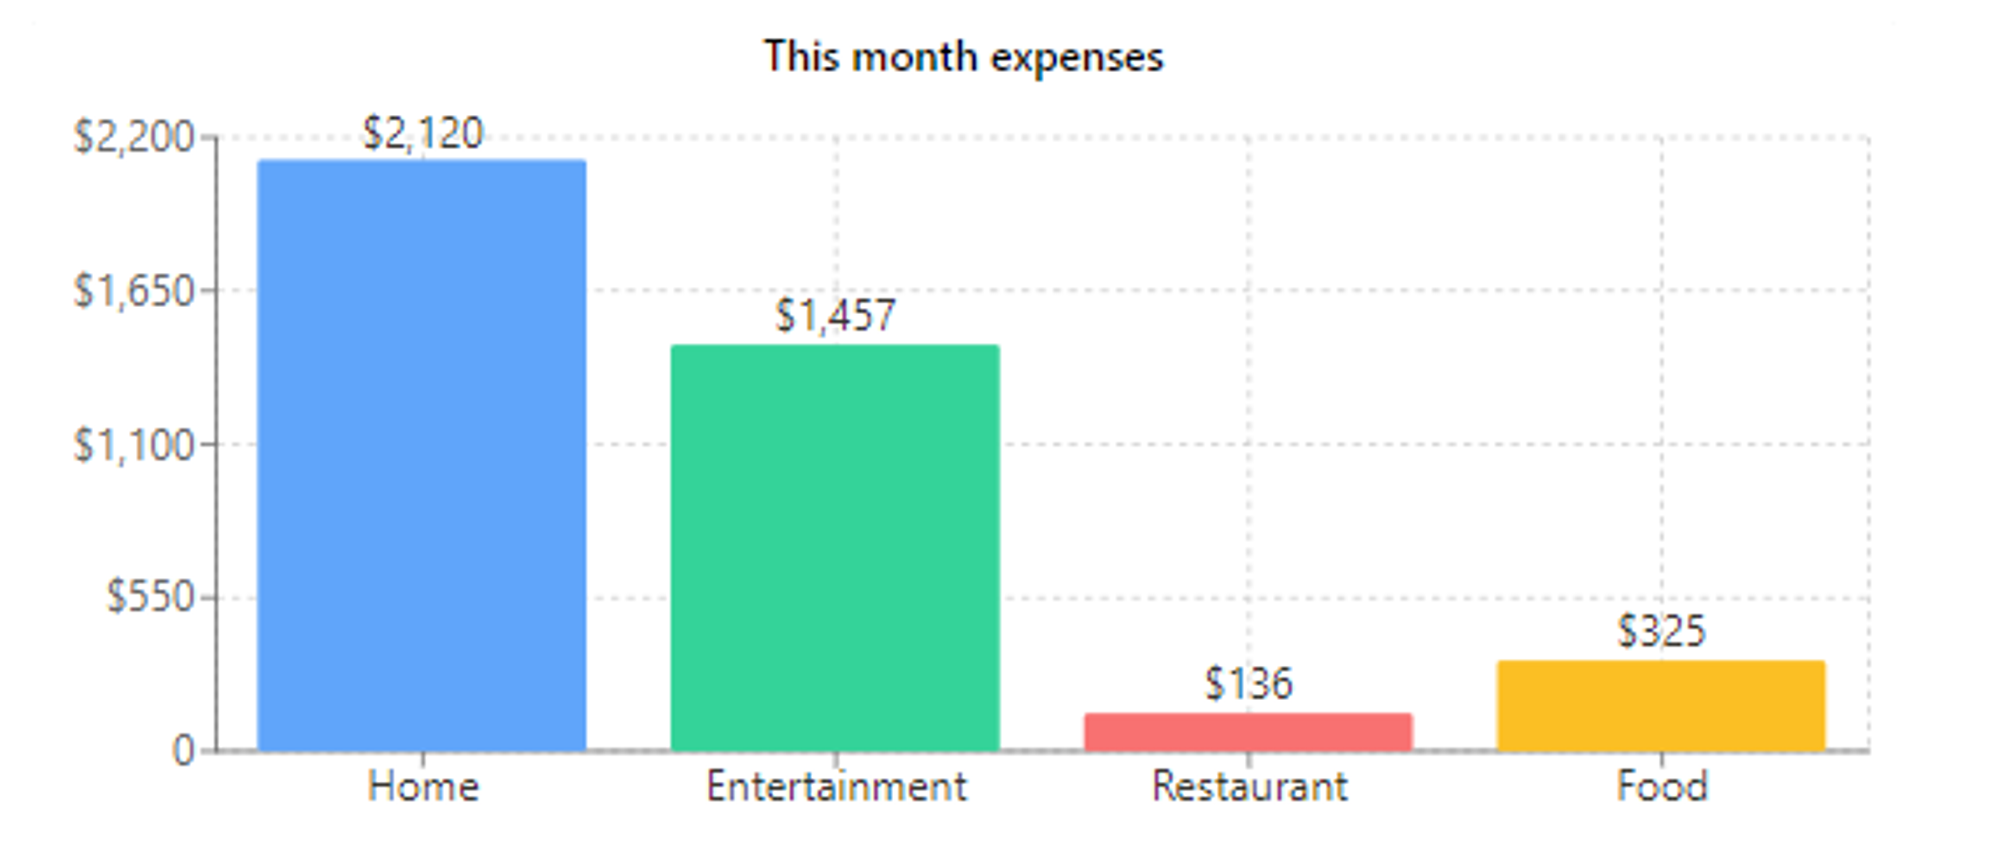 Bar charts where we display monthly expenses per category